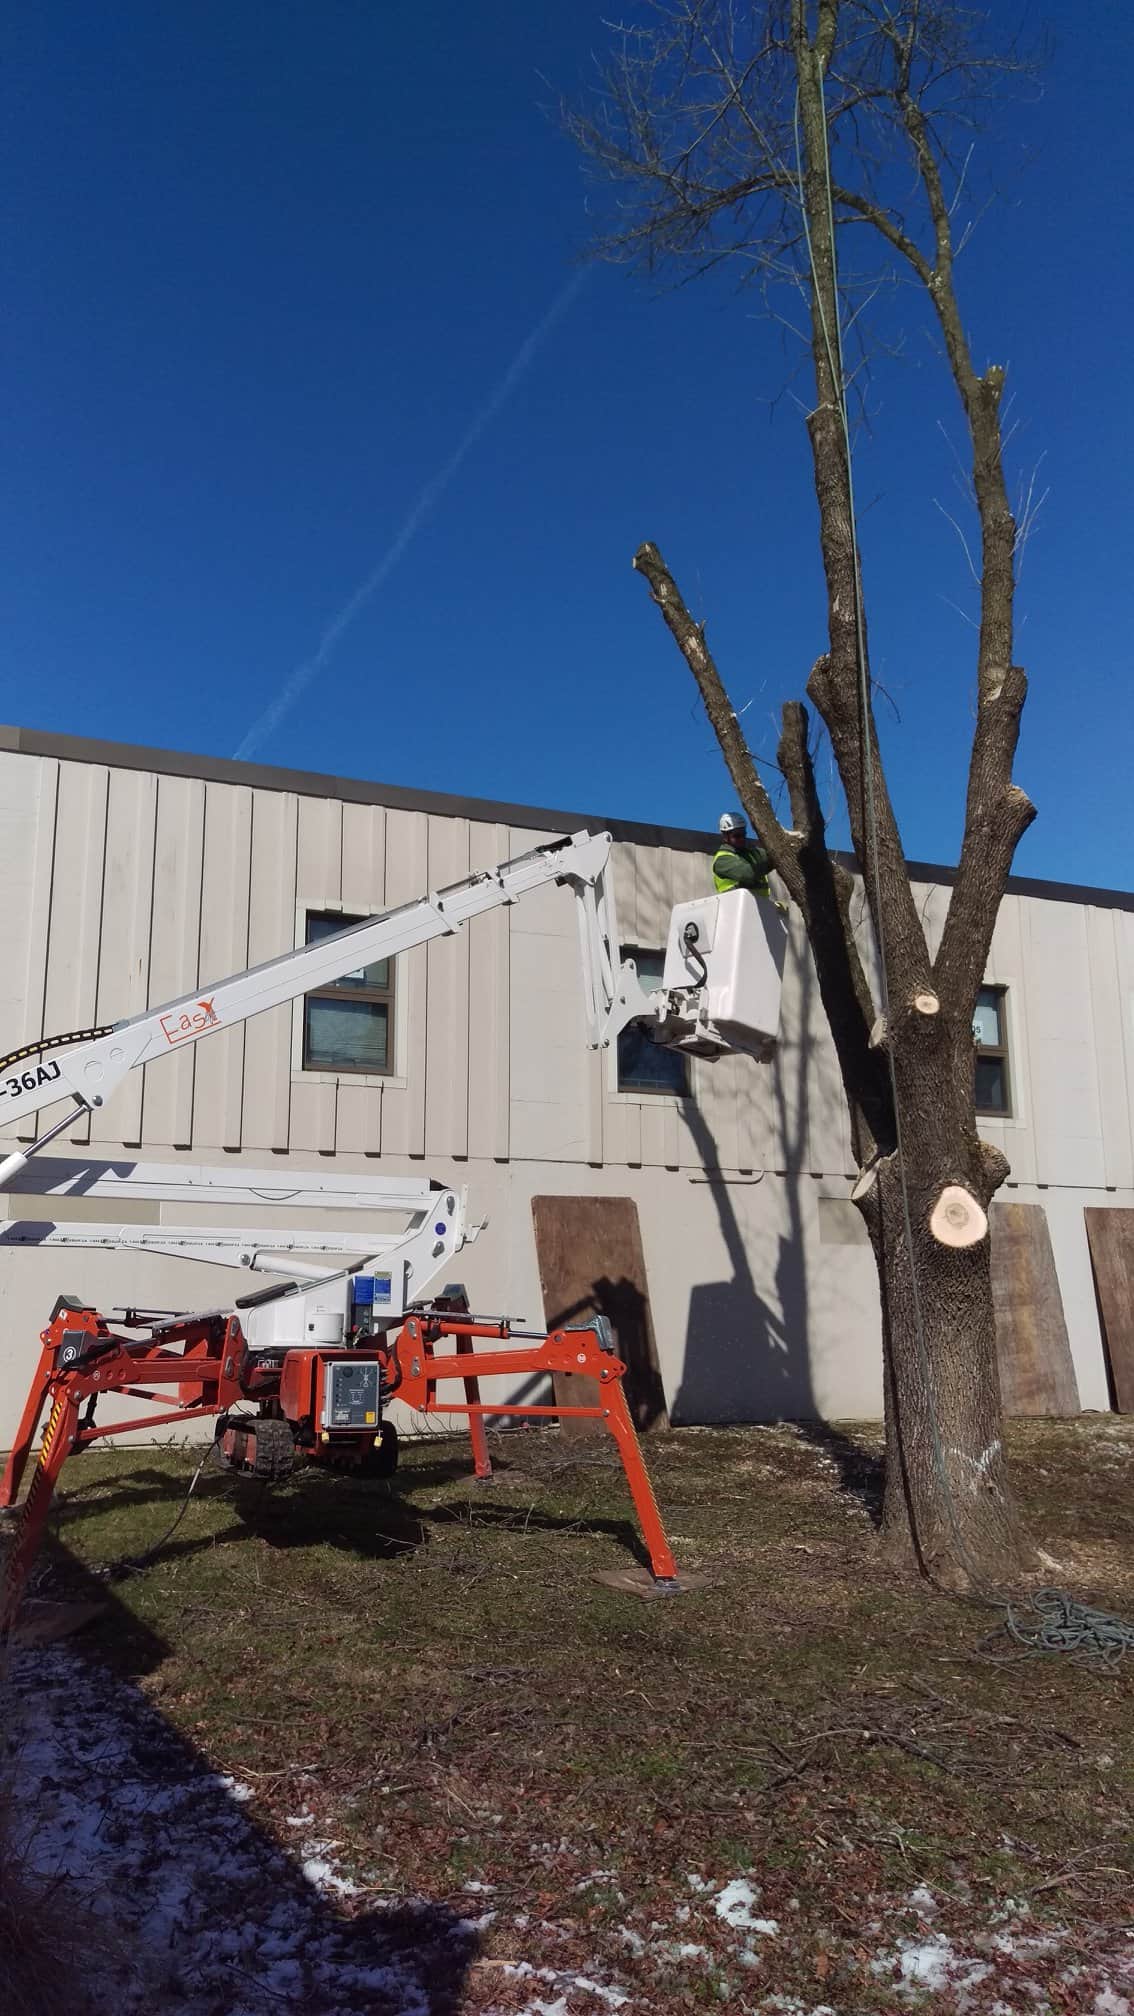 tree branch trimming services near springfield illinois